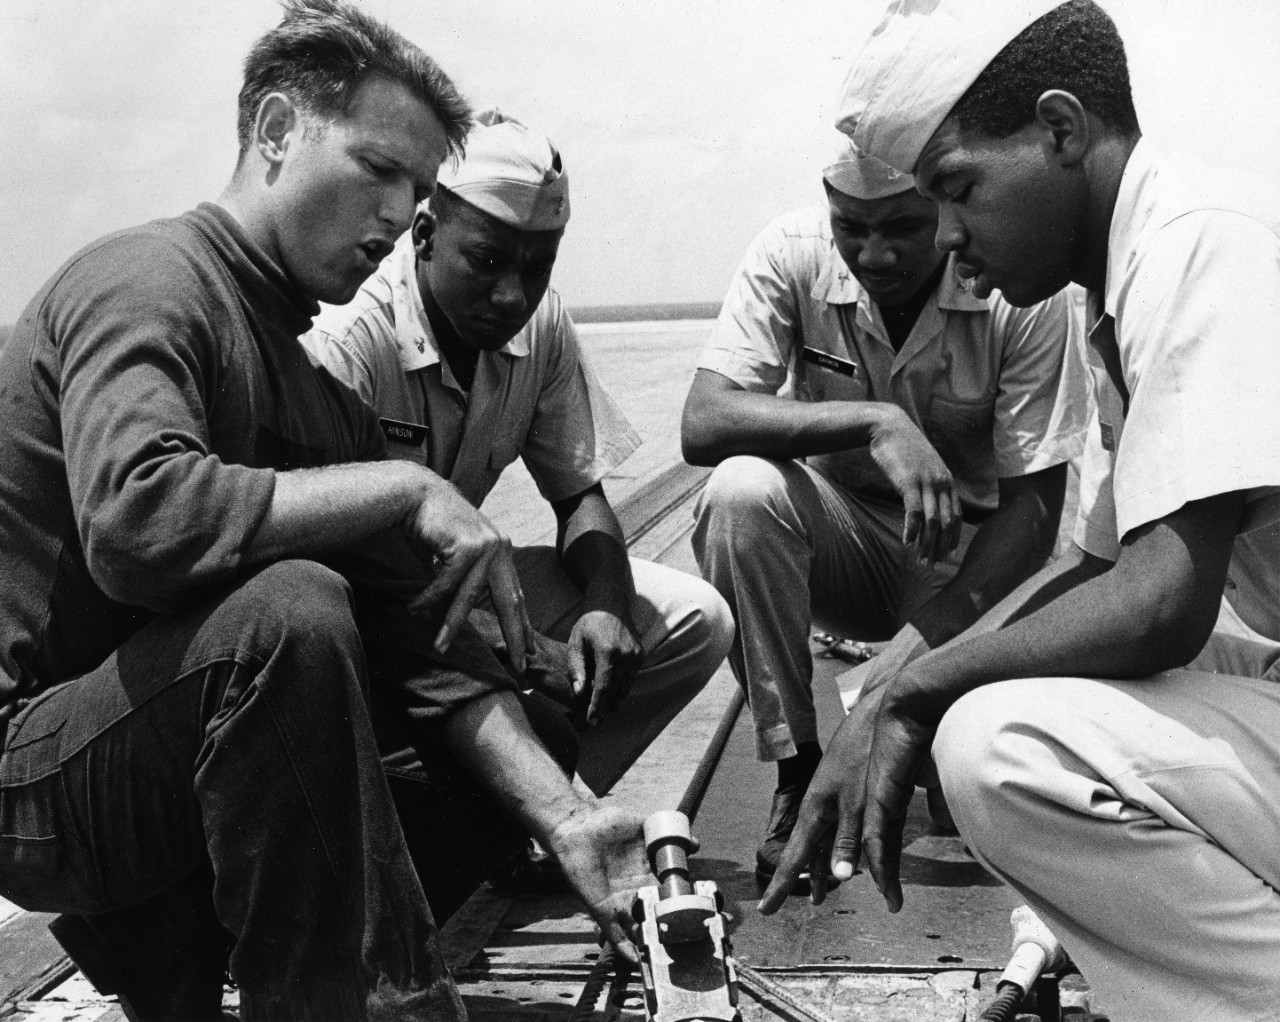 Airman Howard J. Johnson (left) shows a holdback for an F-9 Cougar fighter aircraft to midshipmen from Prairie View A & M College. They are aboard the carrier USS Lexington (CVS-16) for a two week cruise as part of their Navy training.